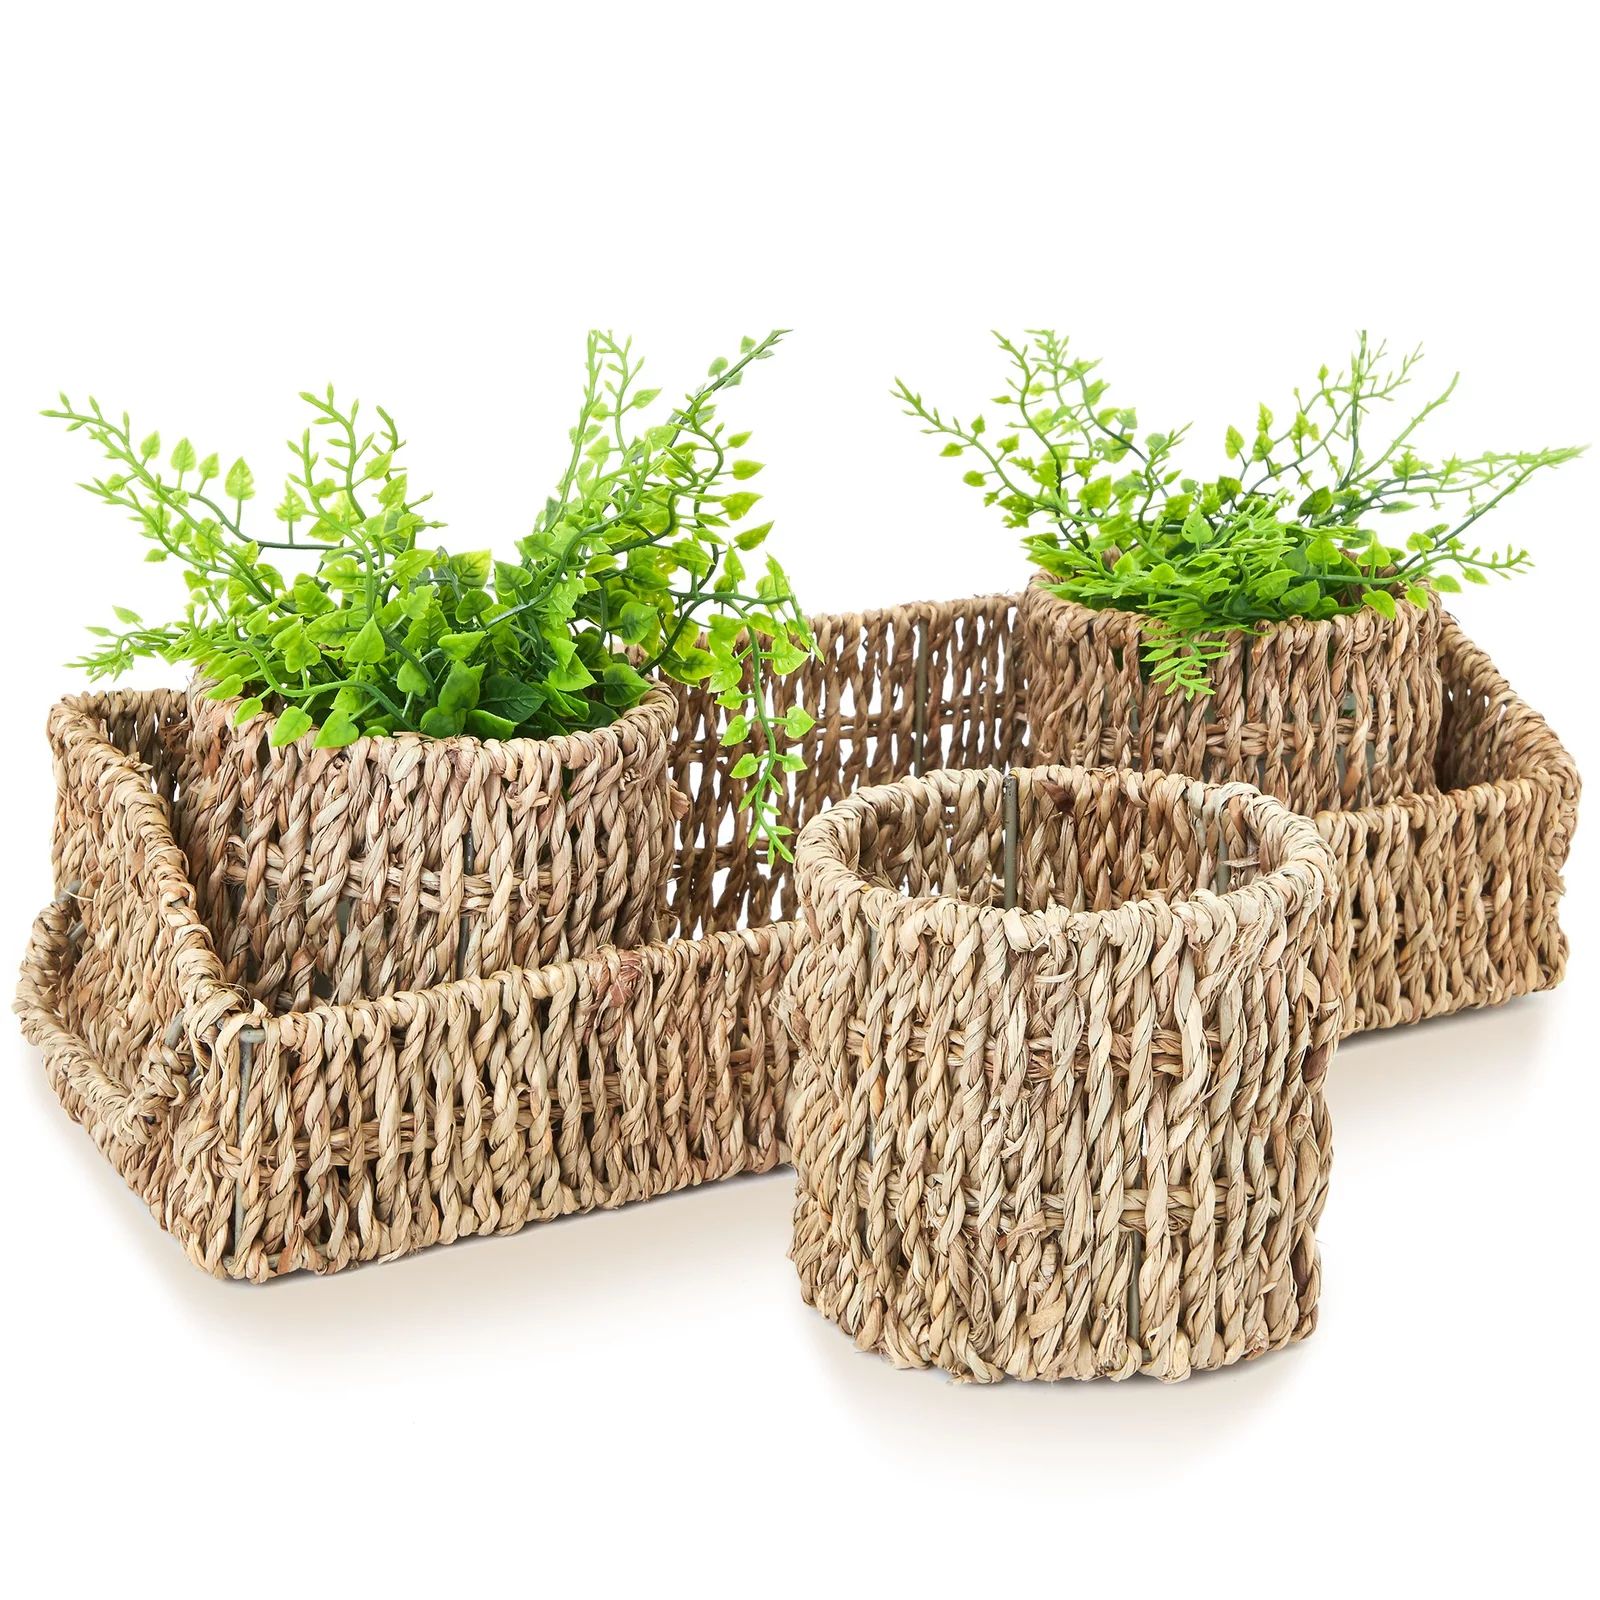 Set of 3 Wicker Round Storage Baskets for Shelves with Rectangular Seagrass Tray, Brown | Walmart (US)